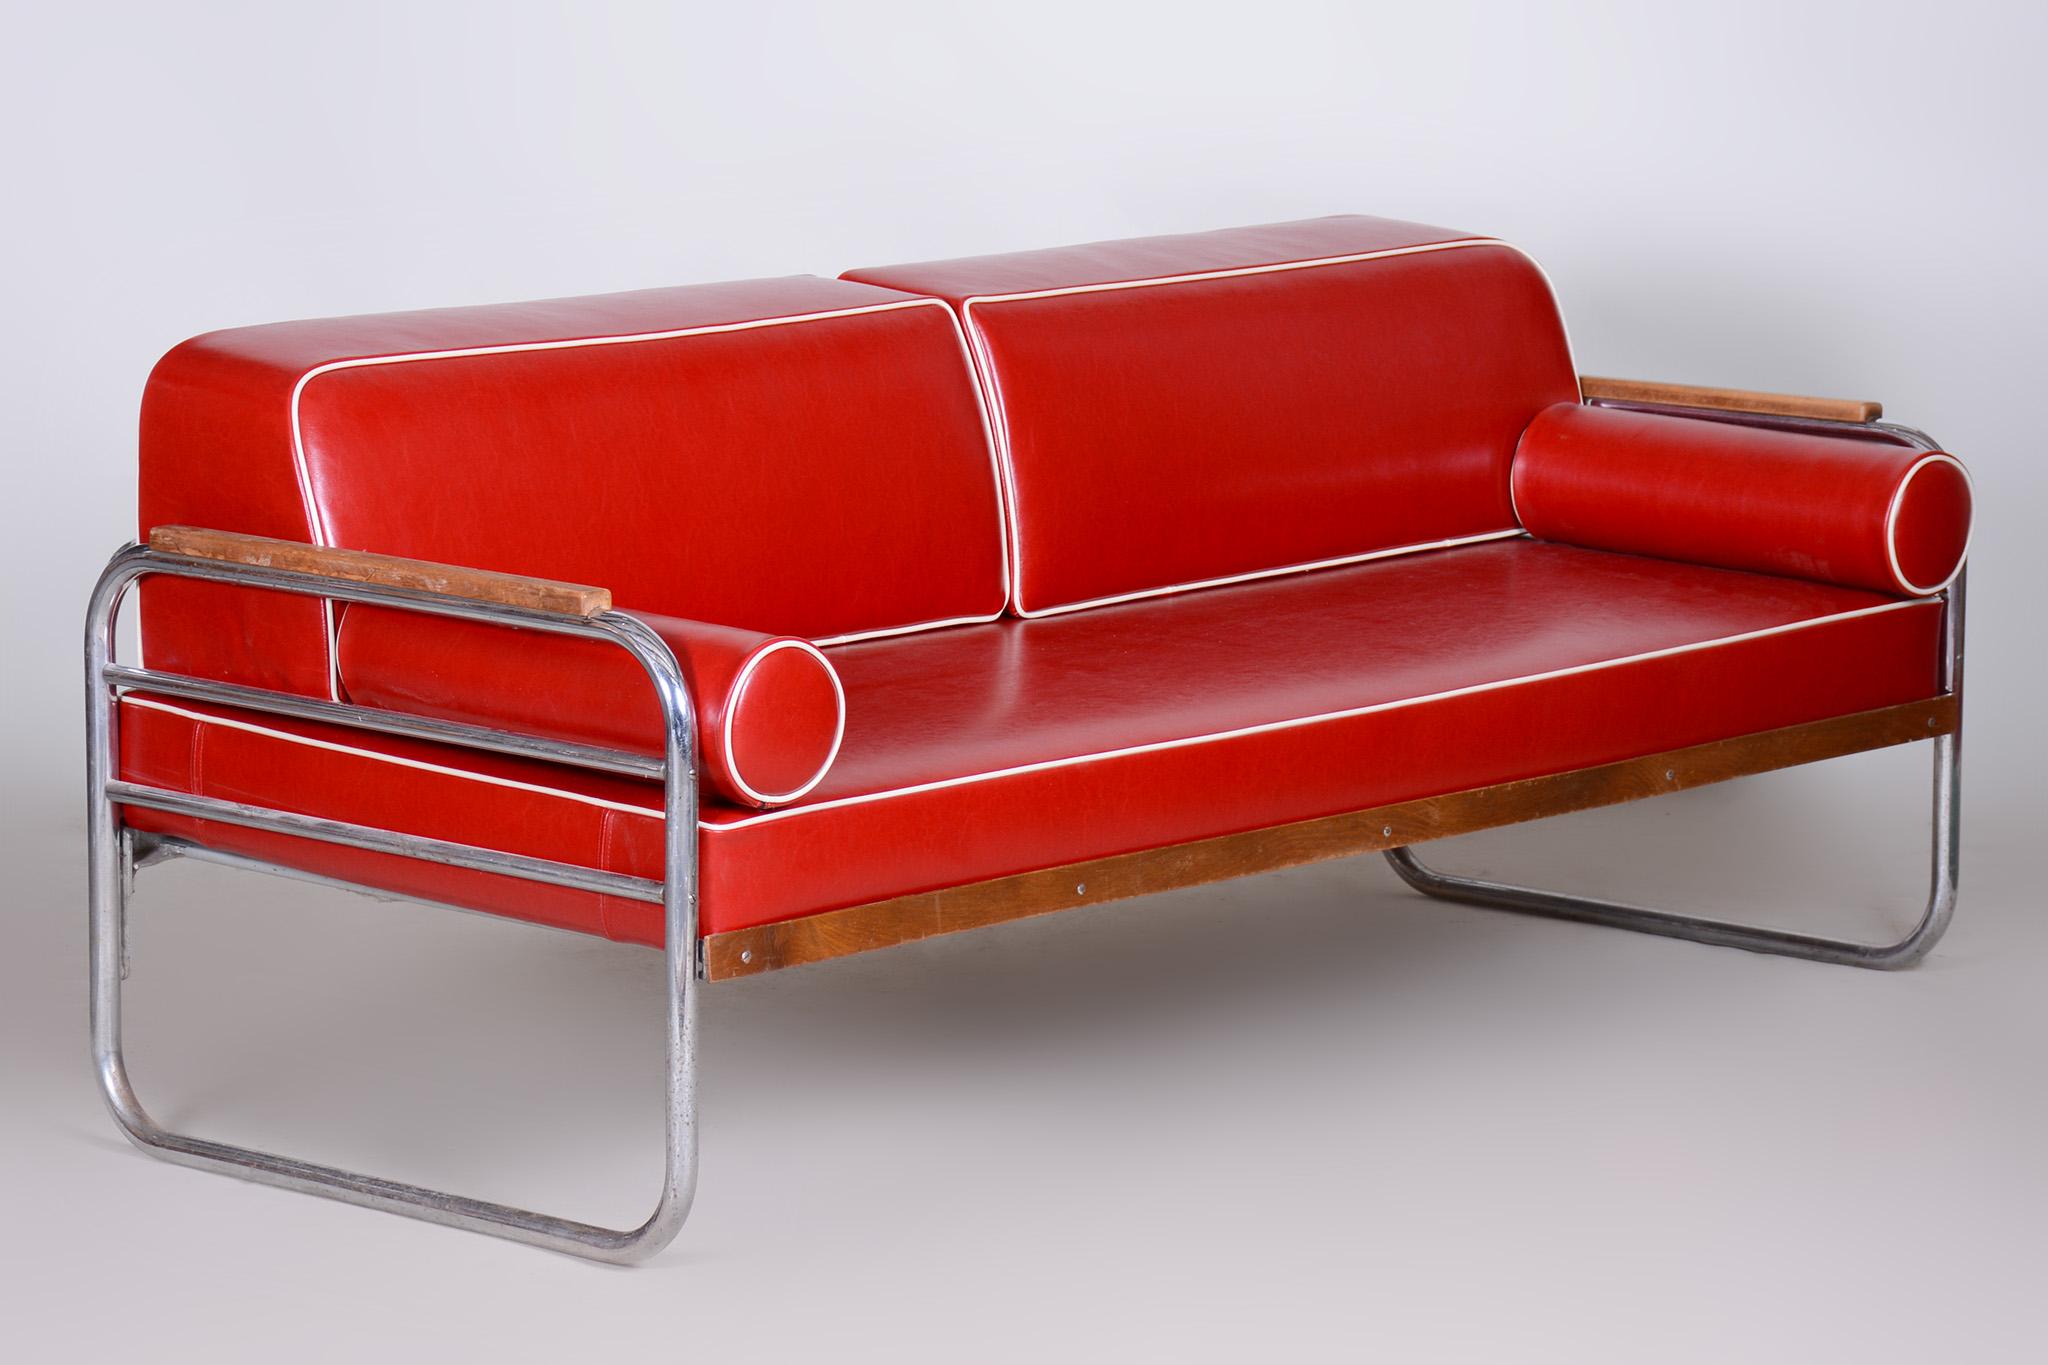 Red High-Quality Leather Bauhaus Sofa by Thonet, Chrome, Fully Restored, 1930s For Sale 1